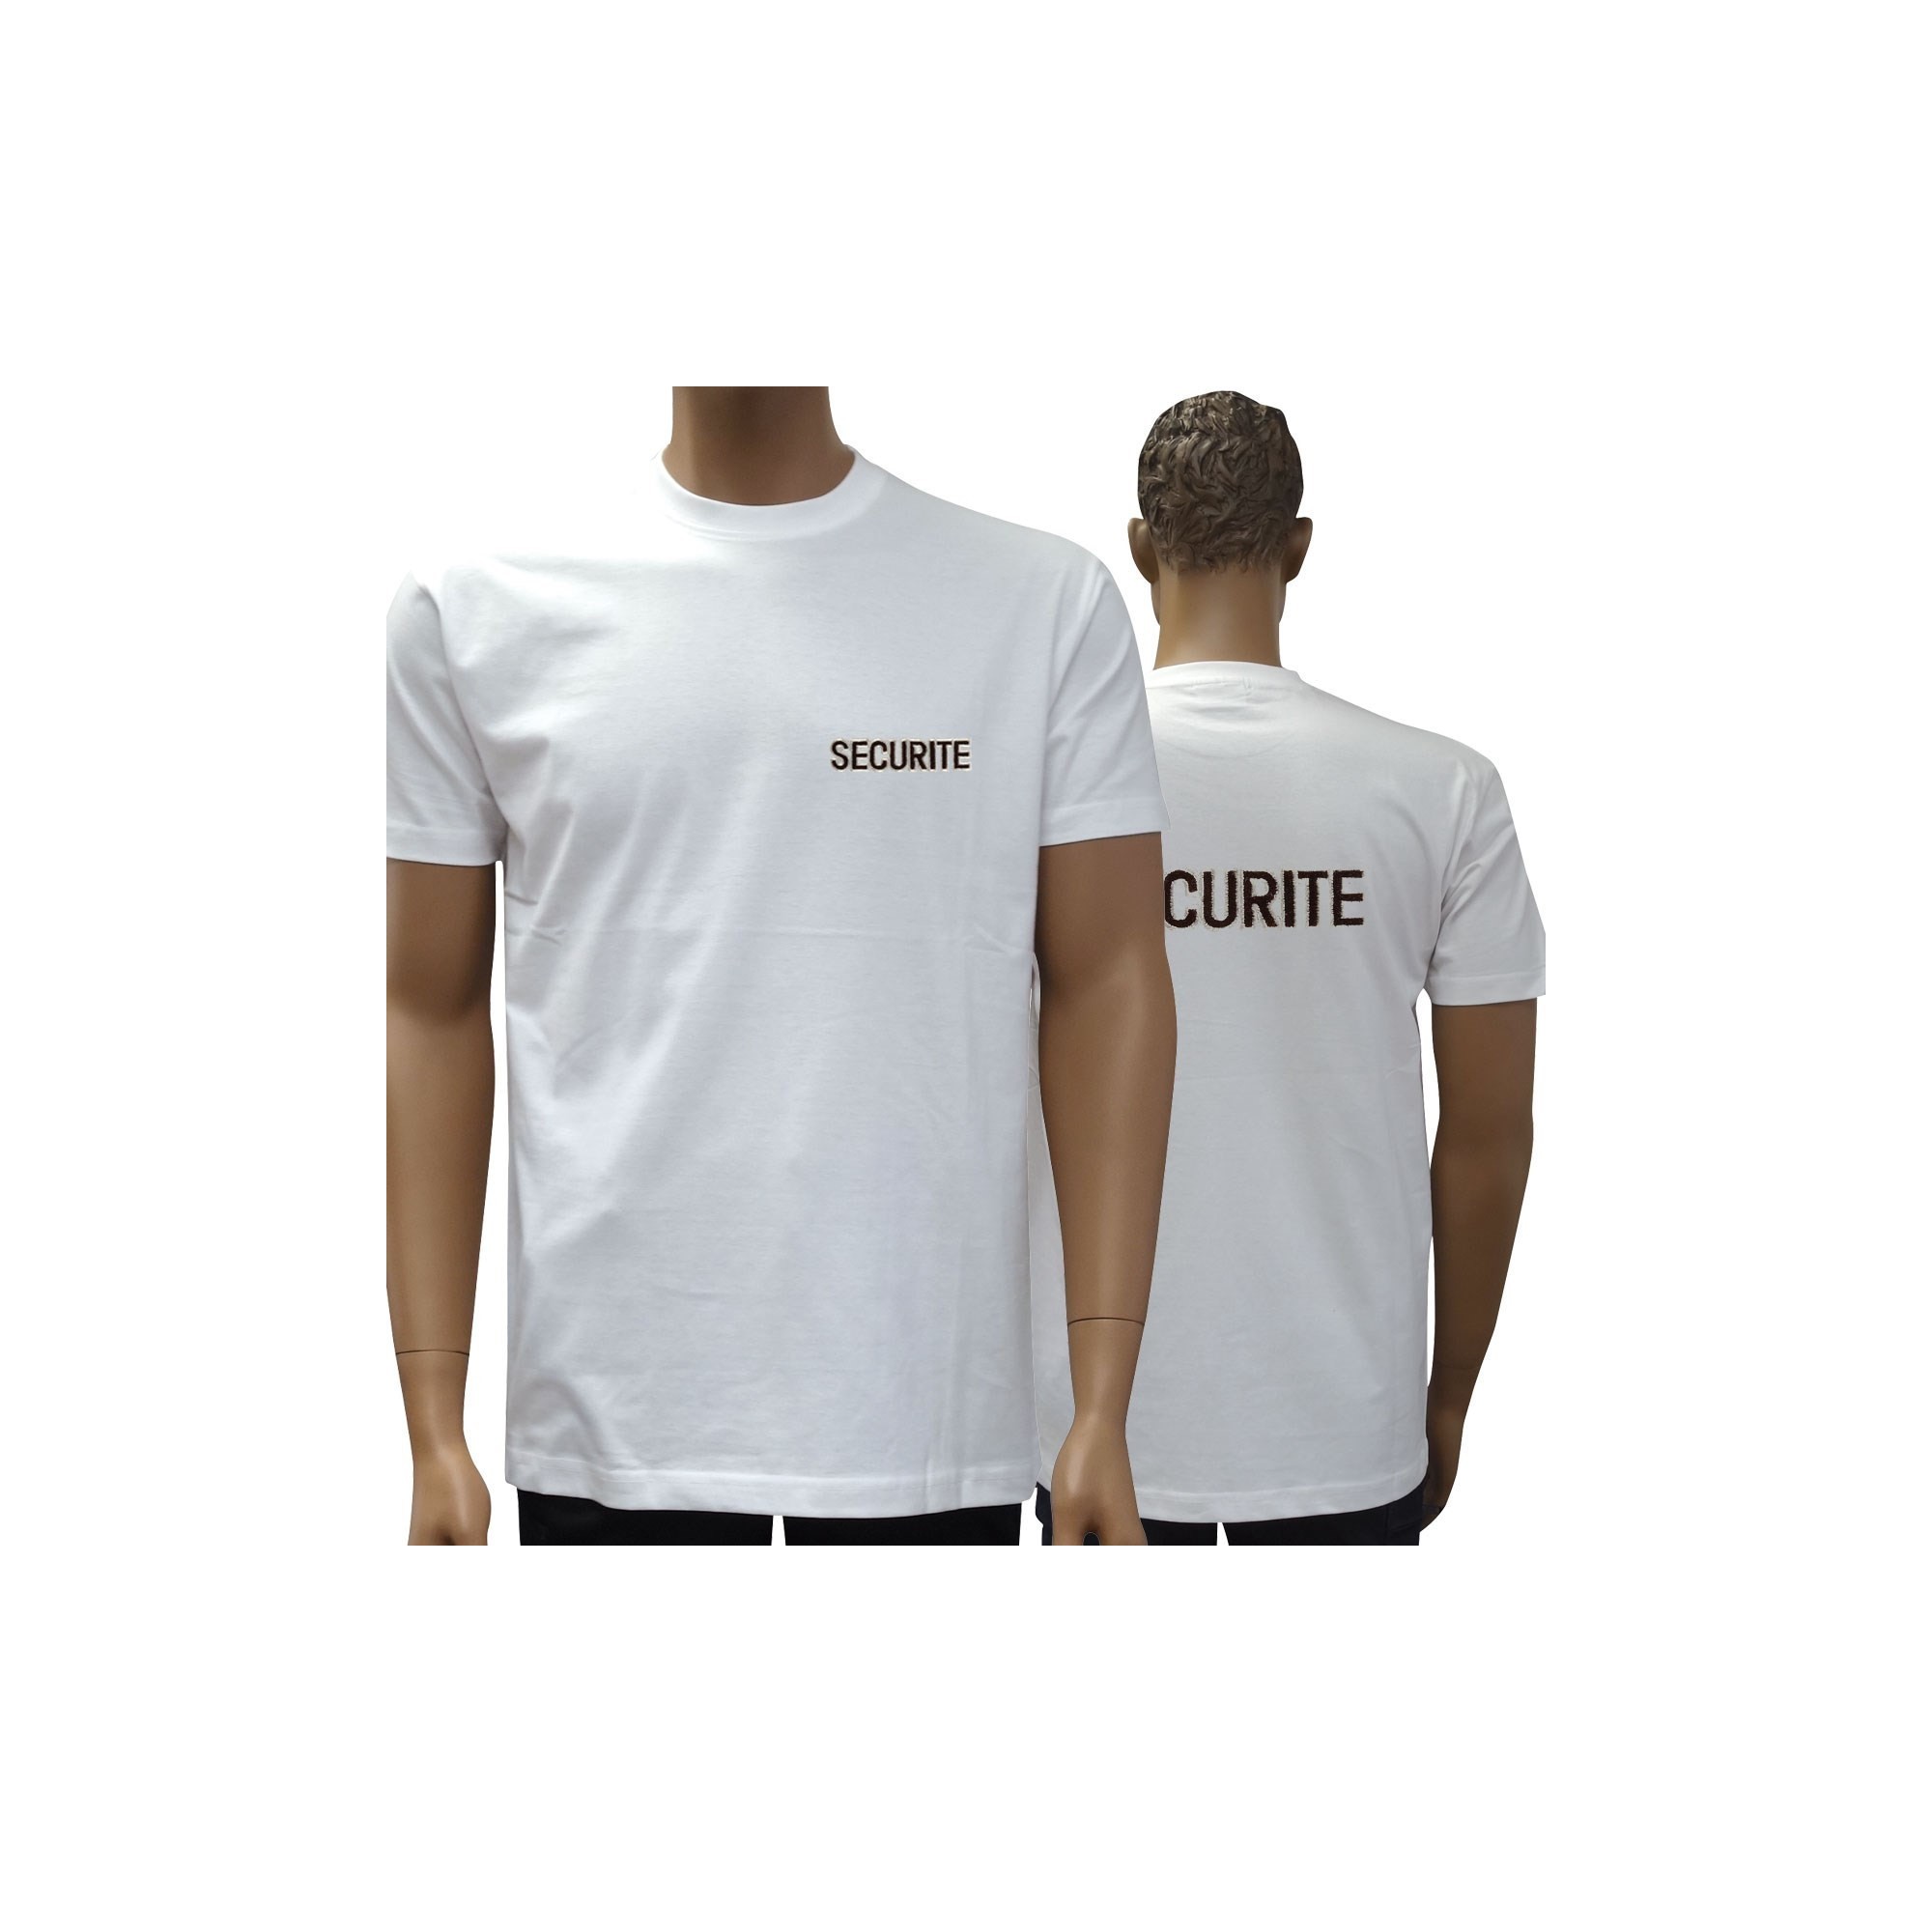 TEE SHIRT BLANC BRODE  SECURITE MANCHES COURTES